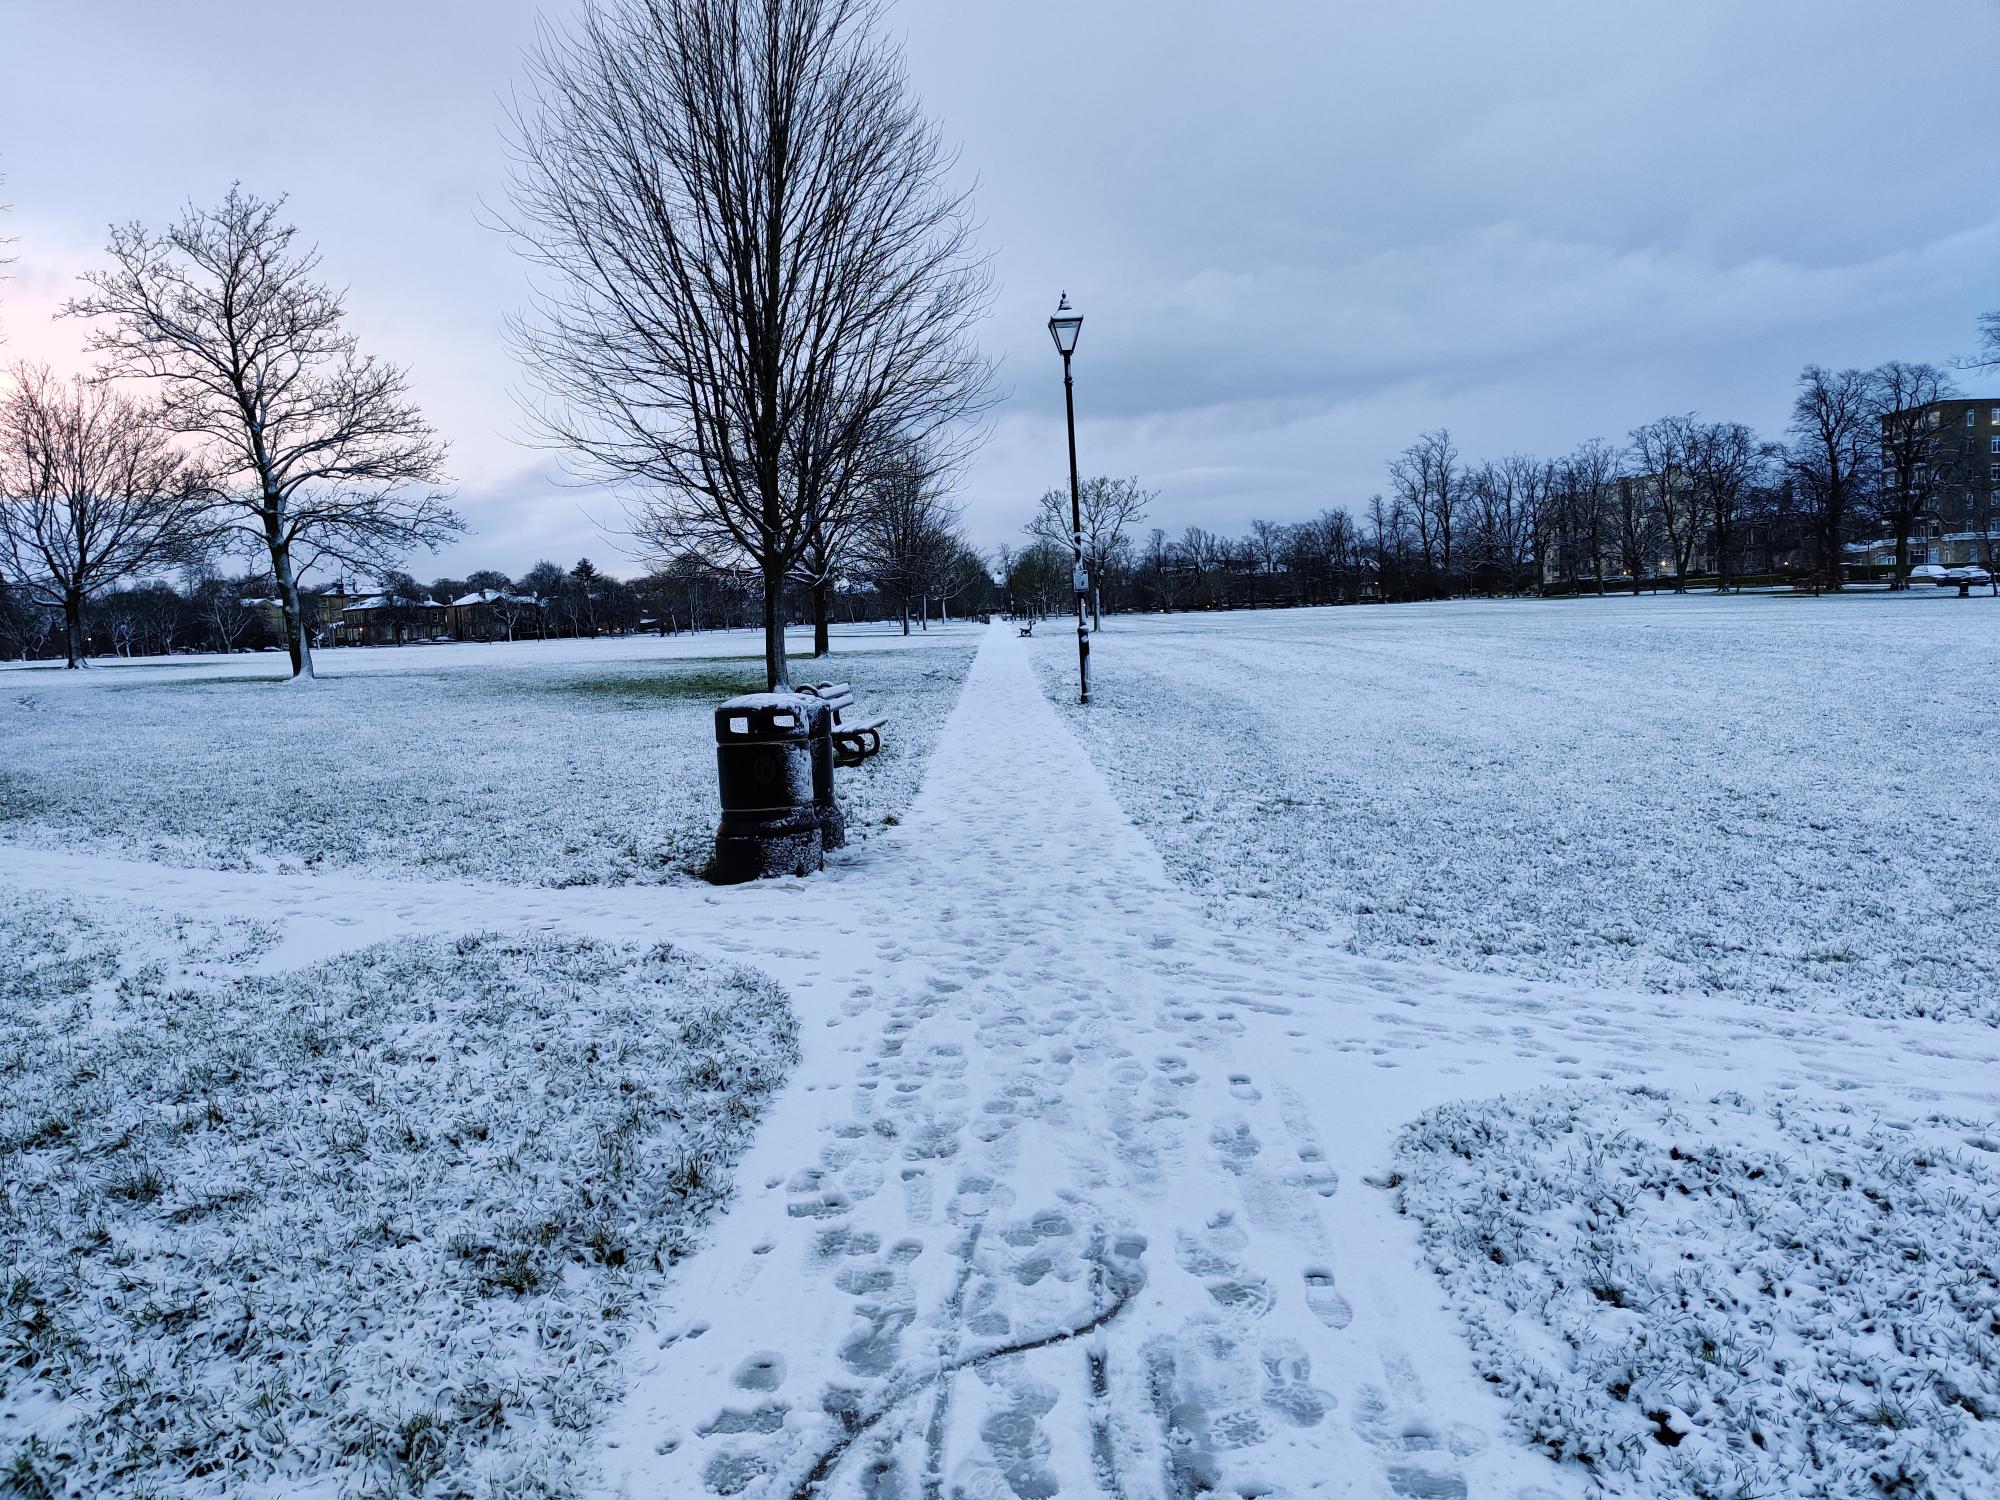 Snow covering the West Park Stray earlier this morning.